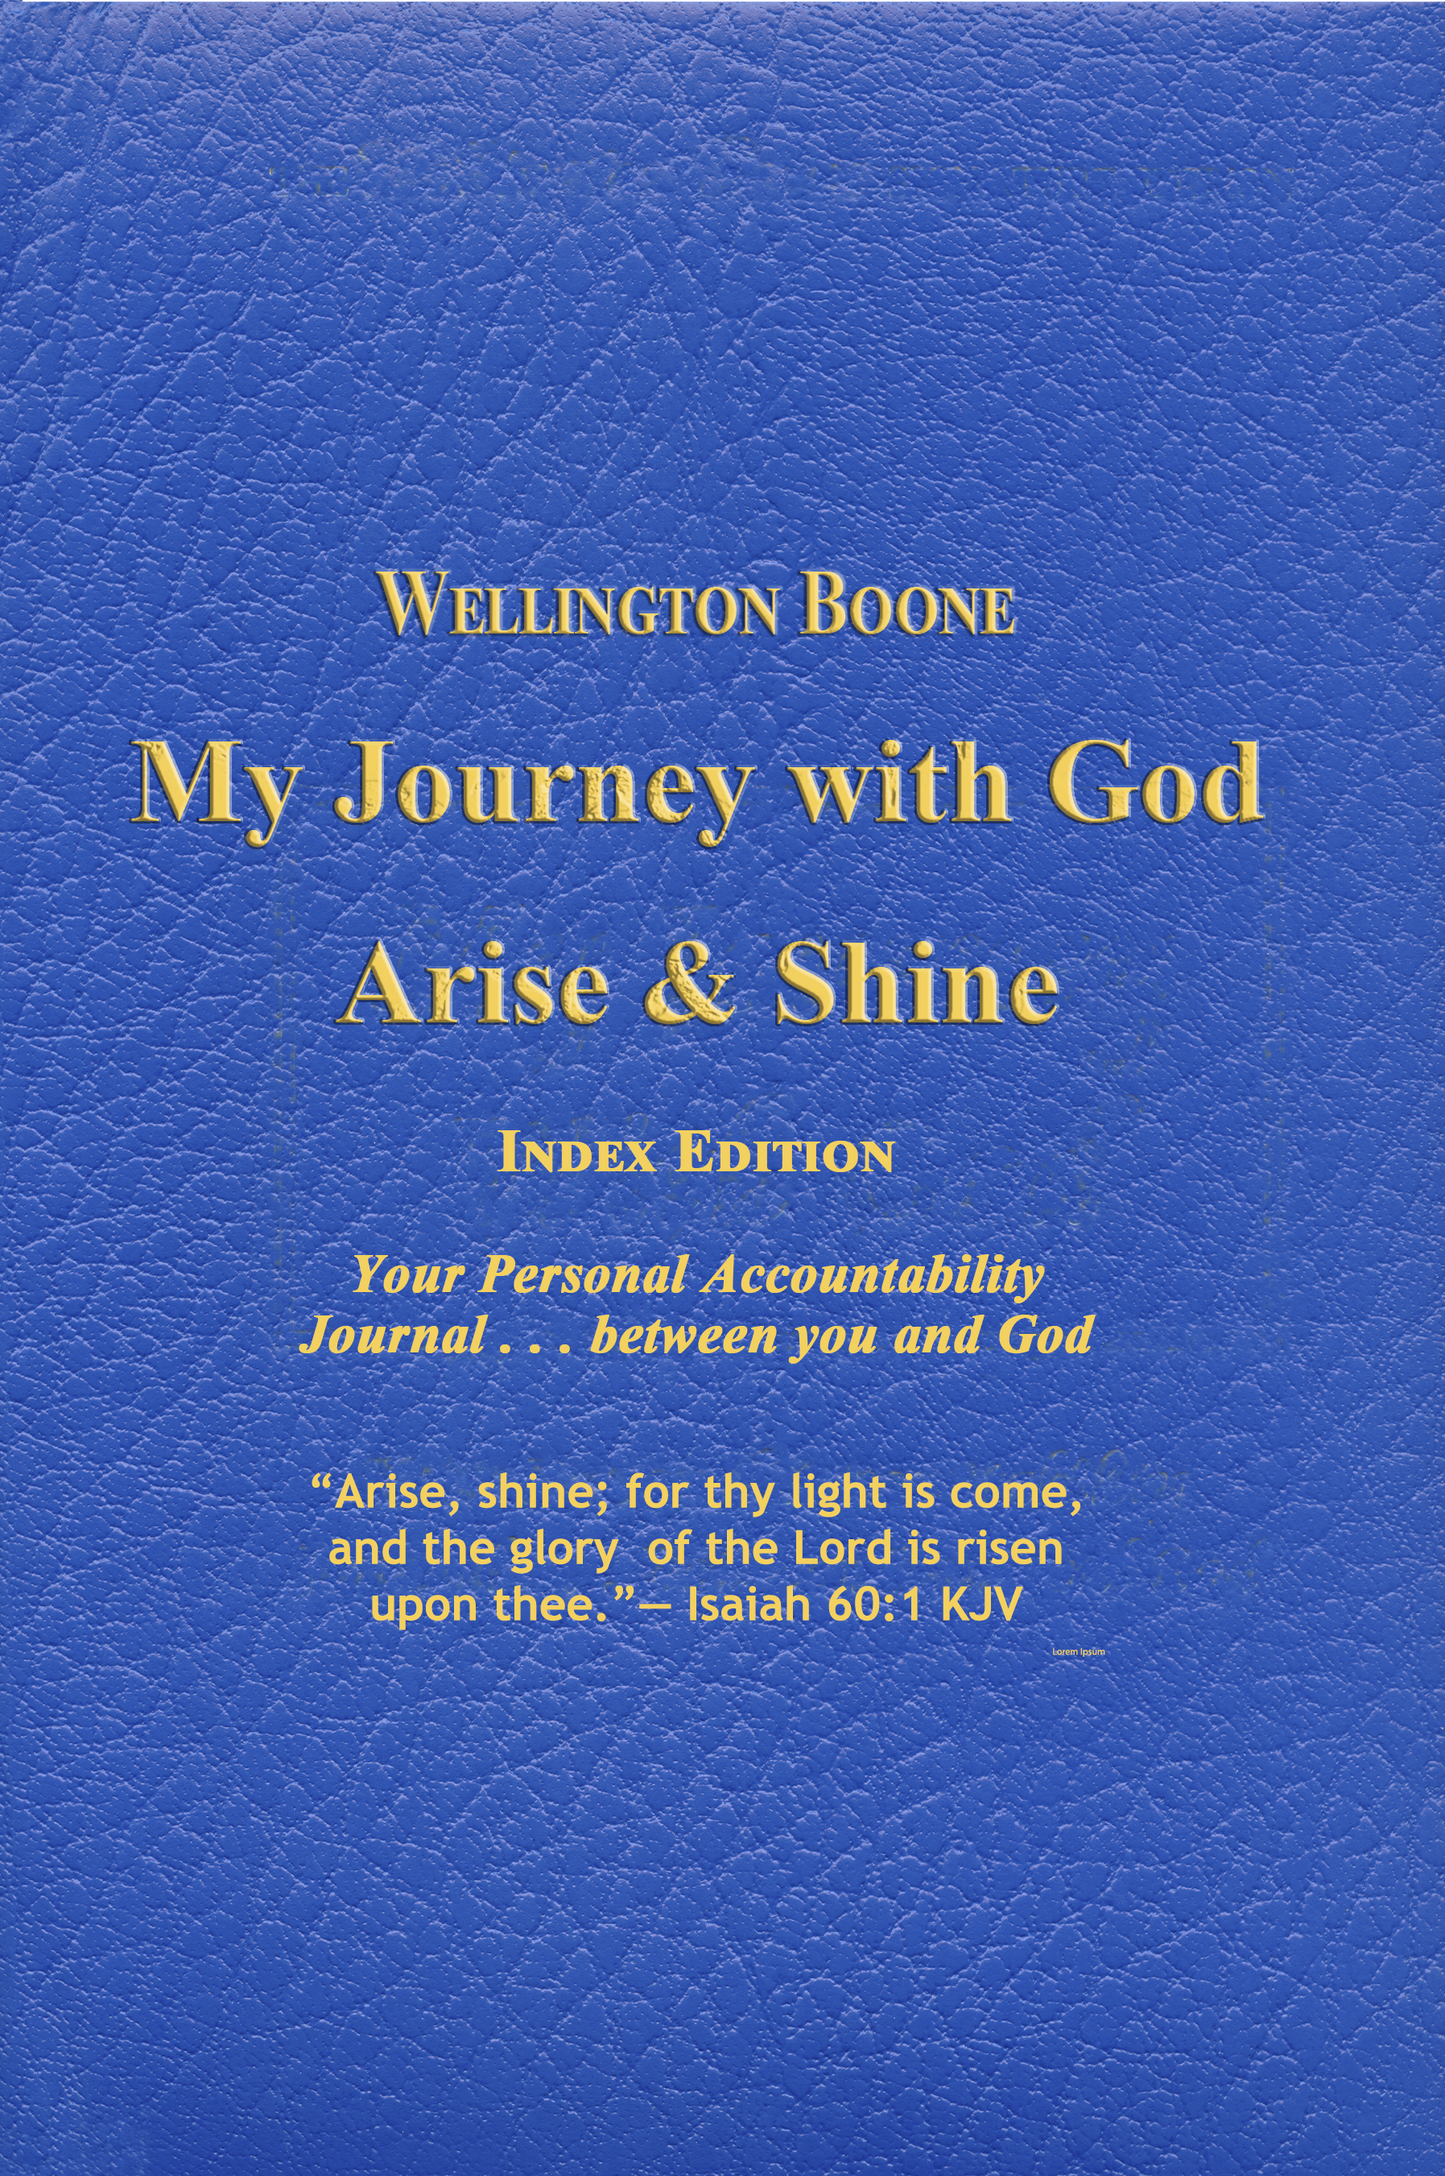 My Journey with God Arise & Shine Index Edition e-book